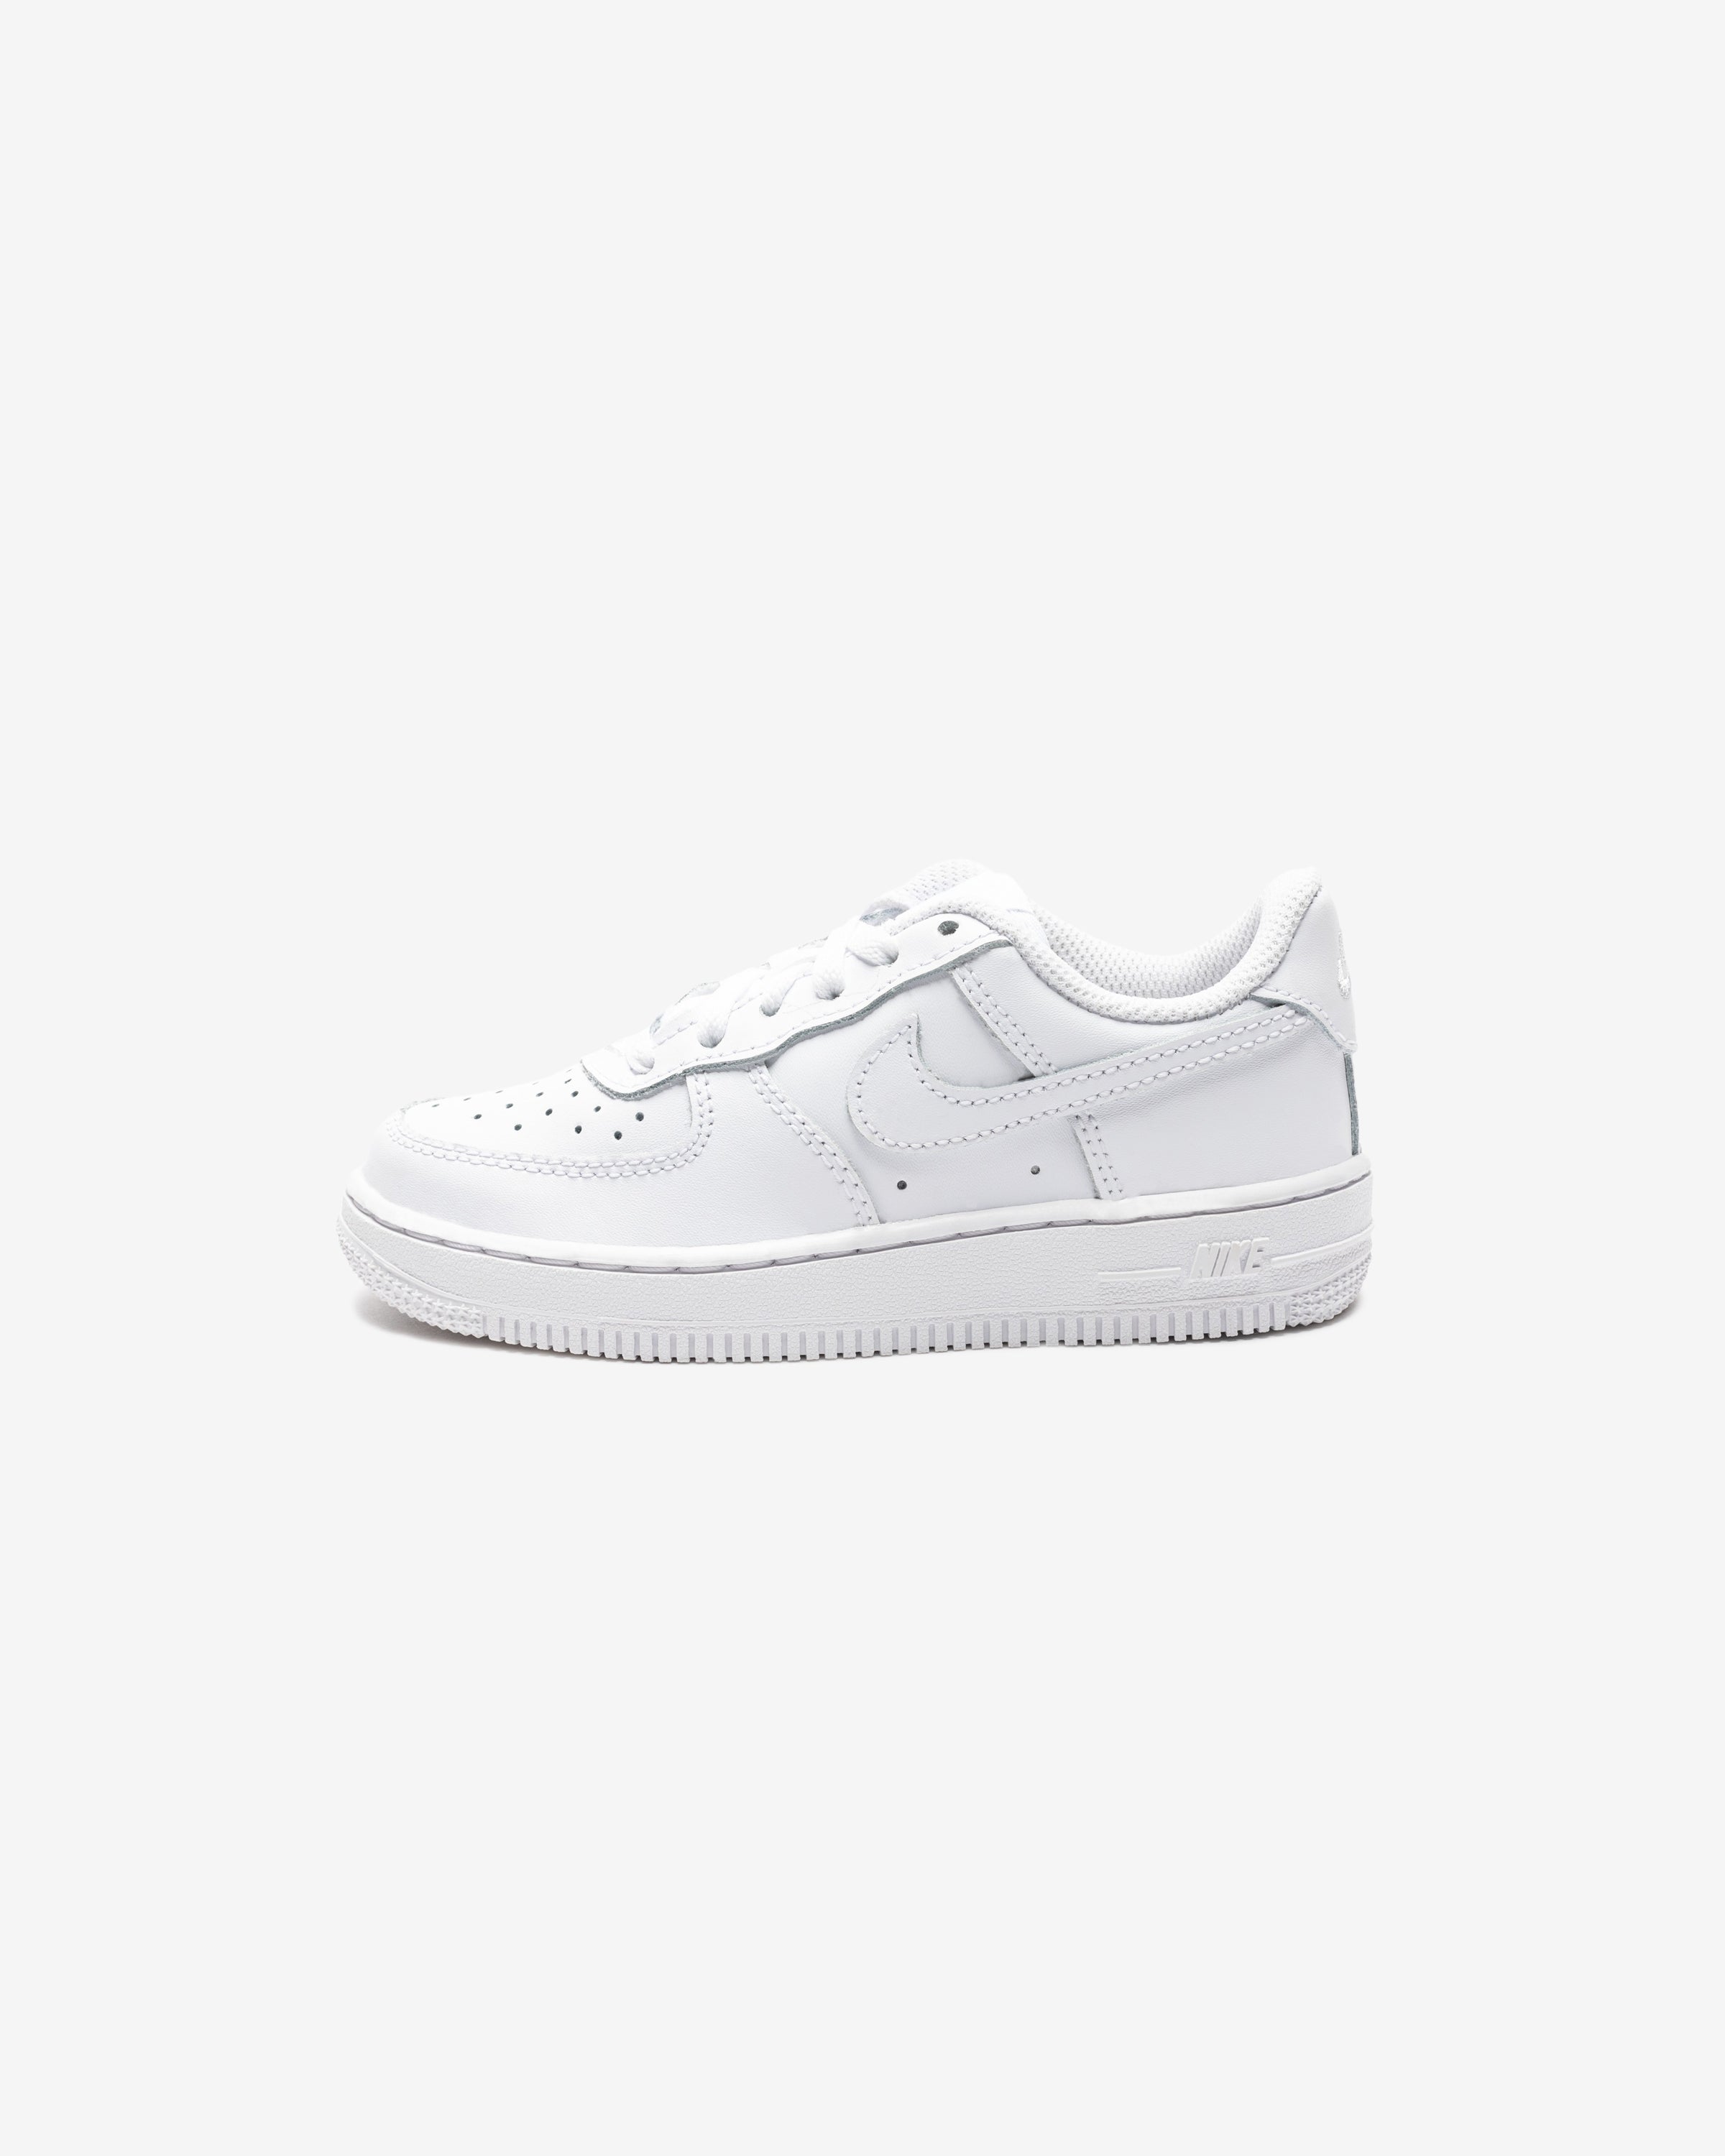 NIKE PS FORCE 1 LE - WHITE – Undefeated